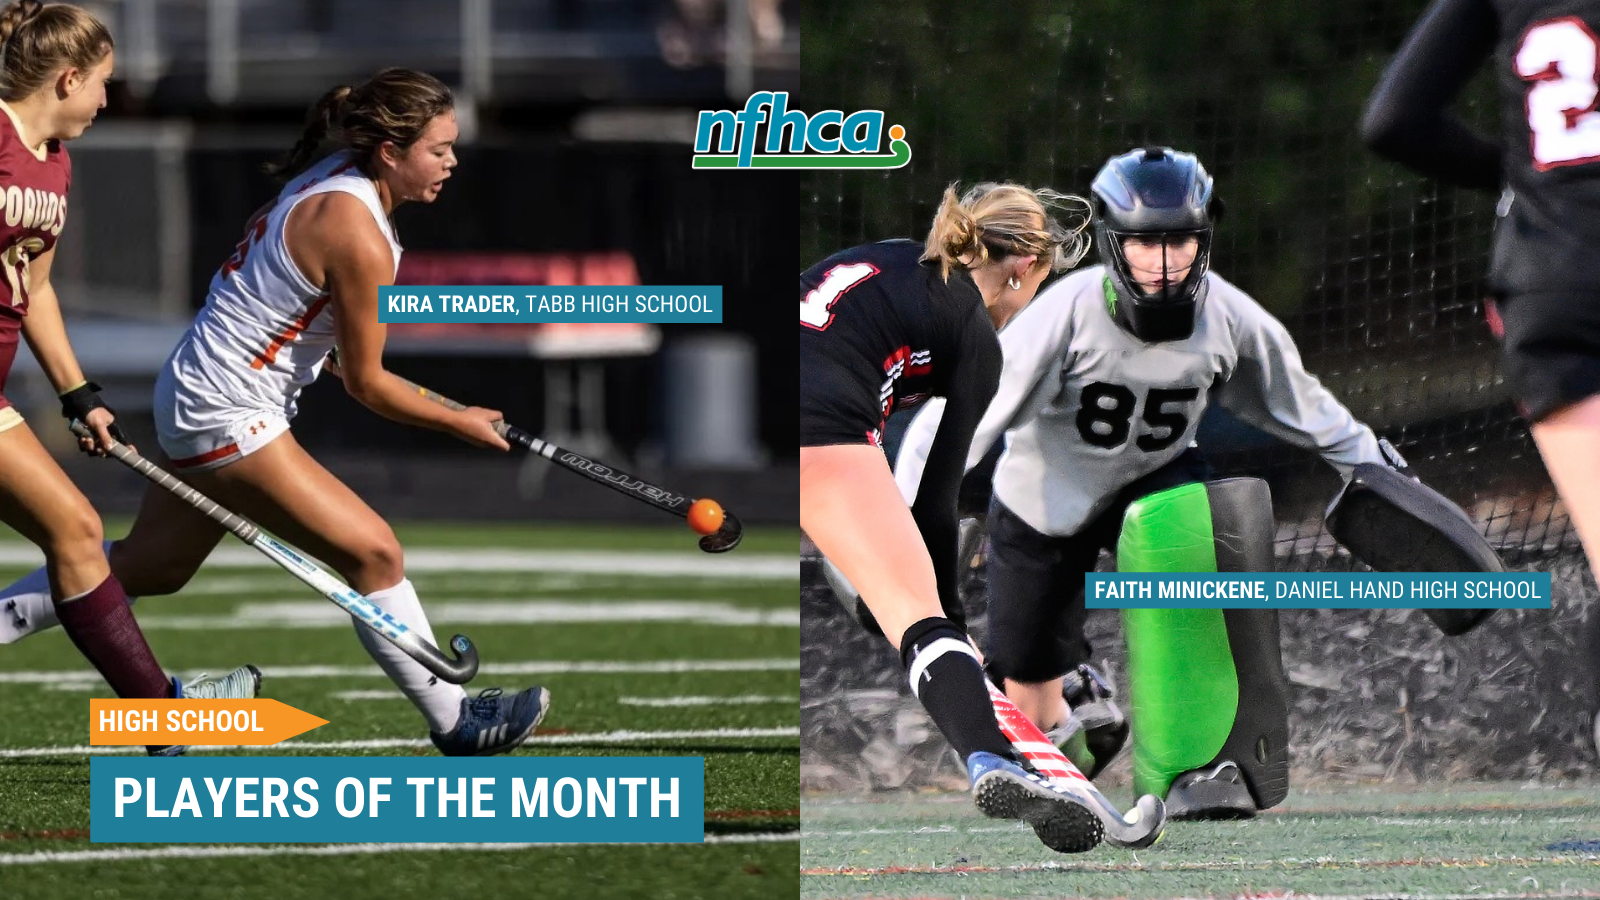 High School Players of the Month